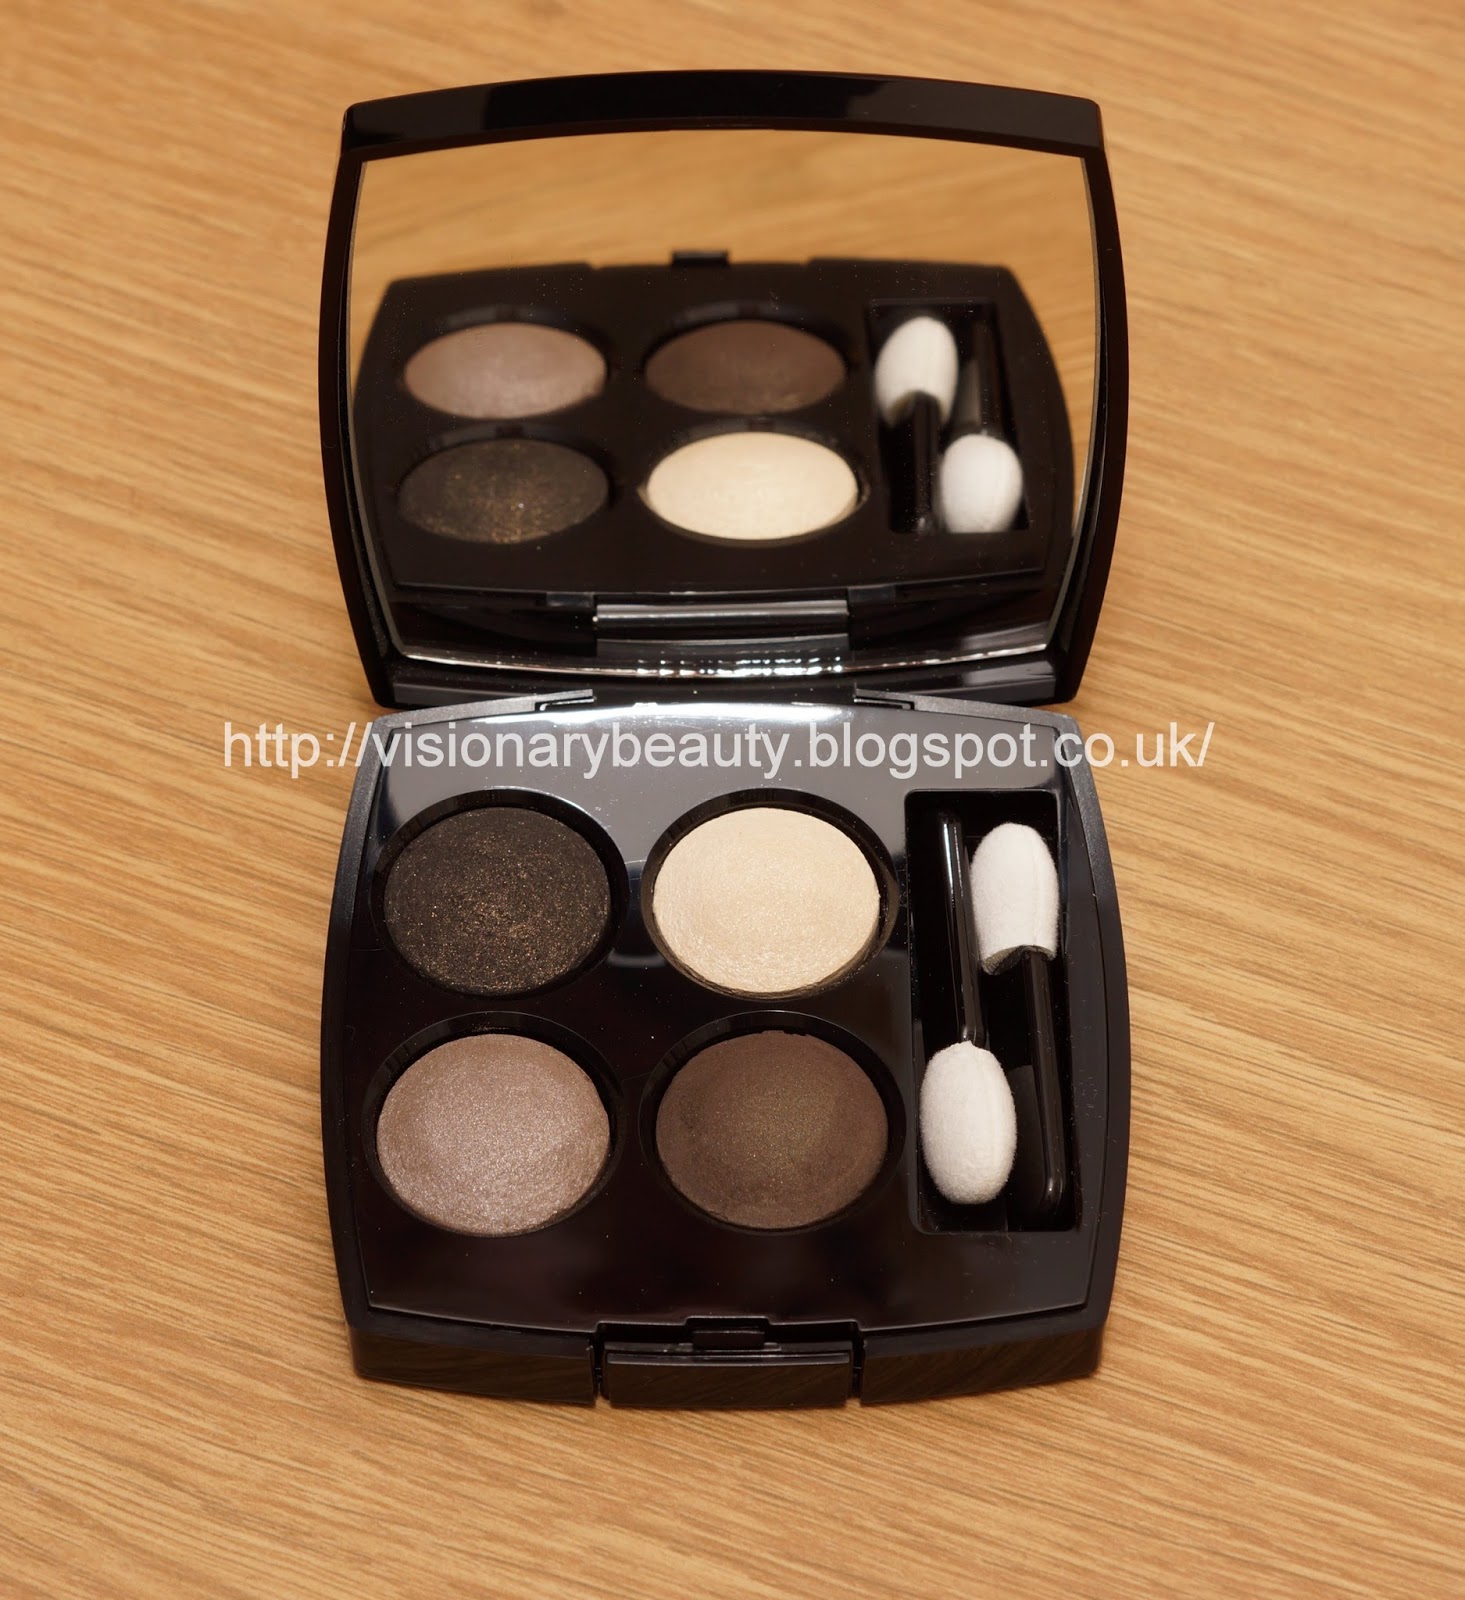 Visionary Beauty: Chanel Superstition Fall collection: Mystere Les 4 Ombres  Eyeshadow Palette